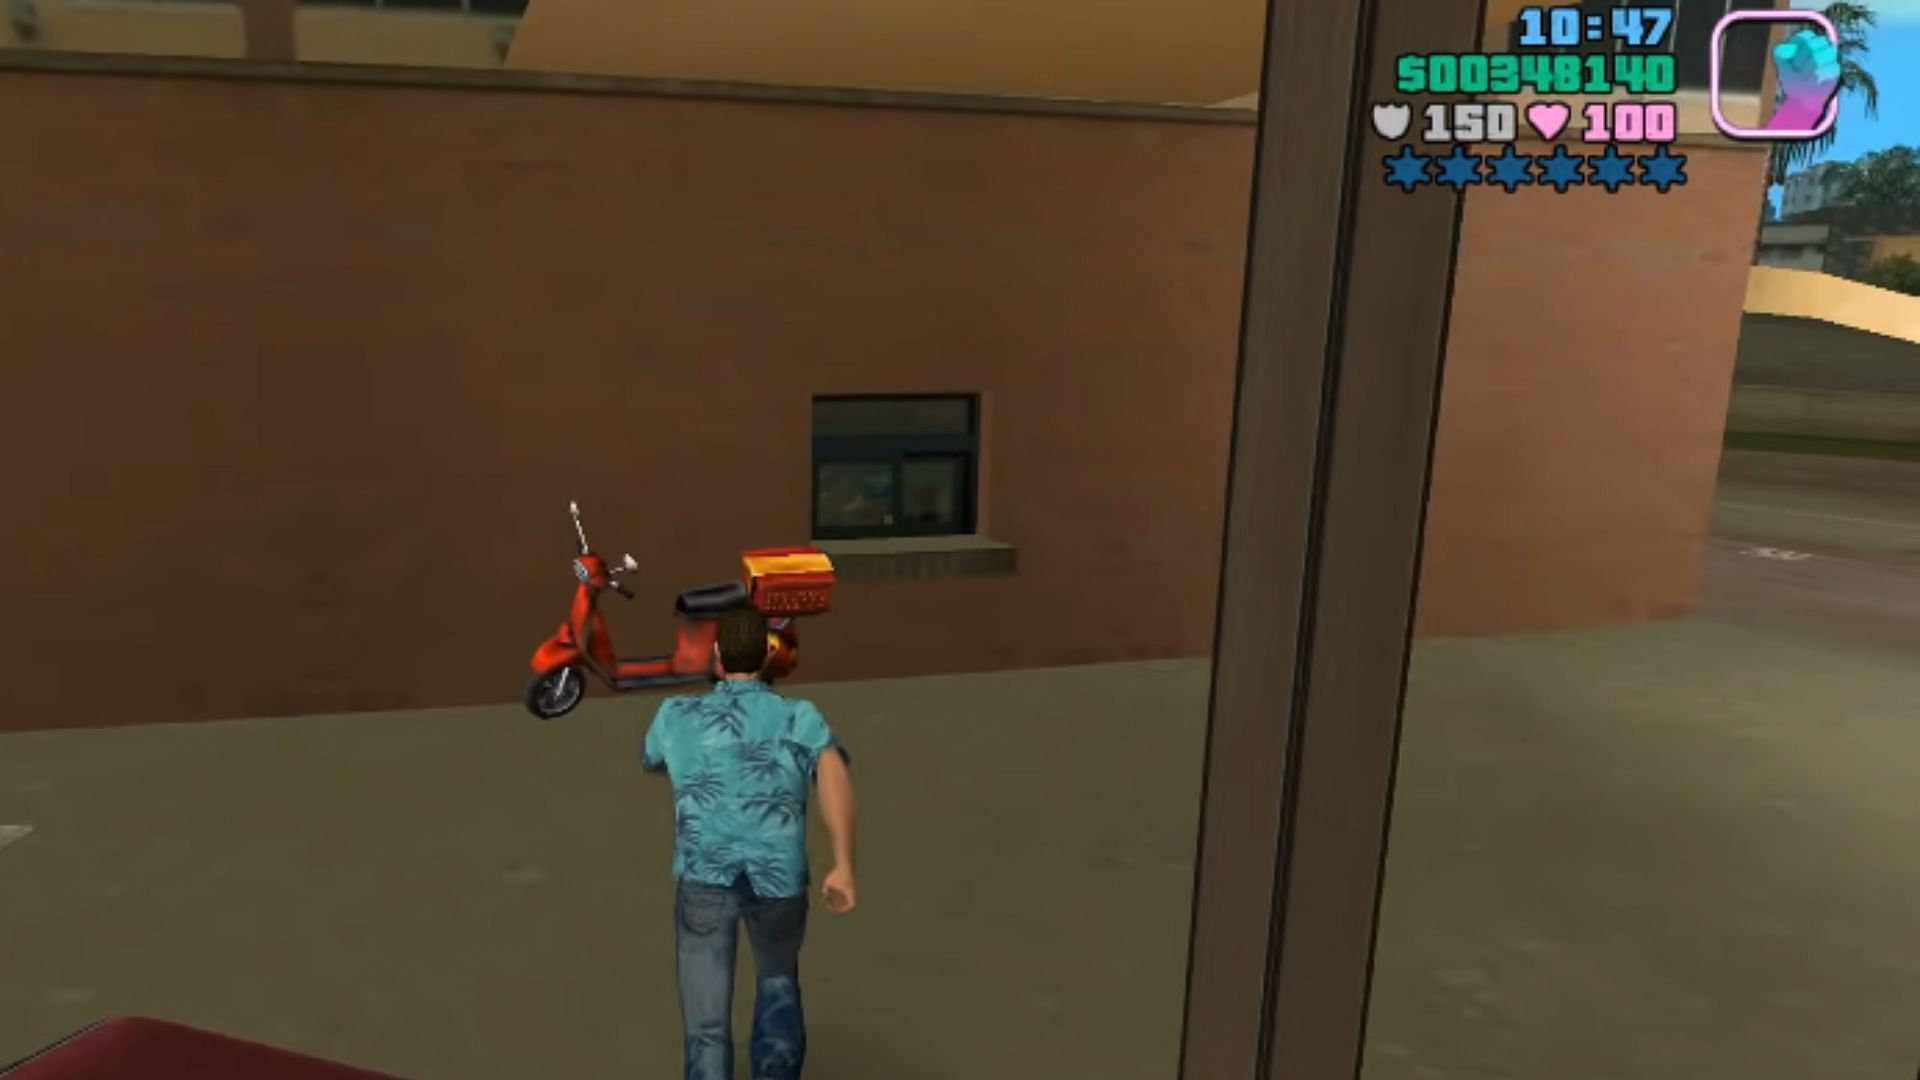 Getting on this scooter starts the Pizza Boy missions in the game (Image via YouTube/GTA Series Videos)